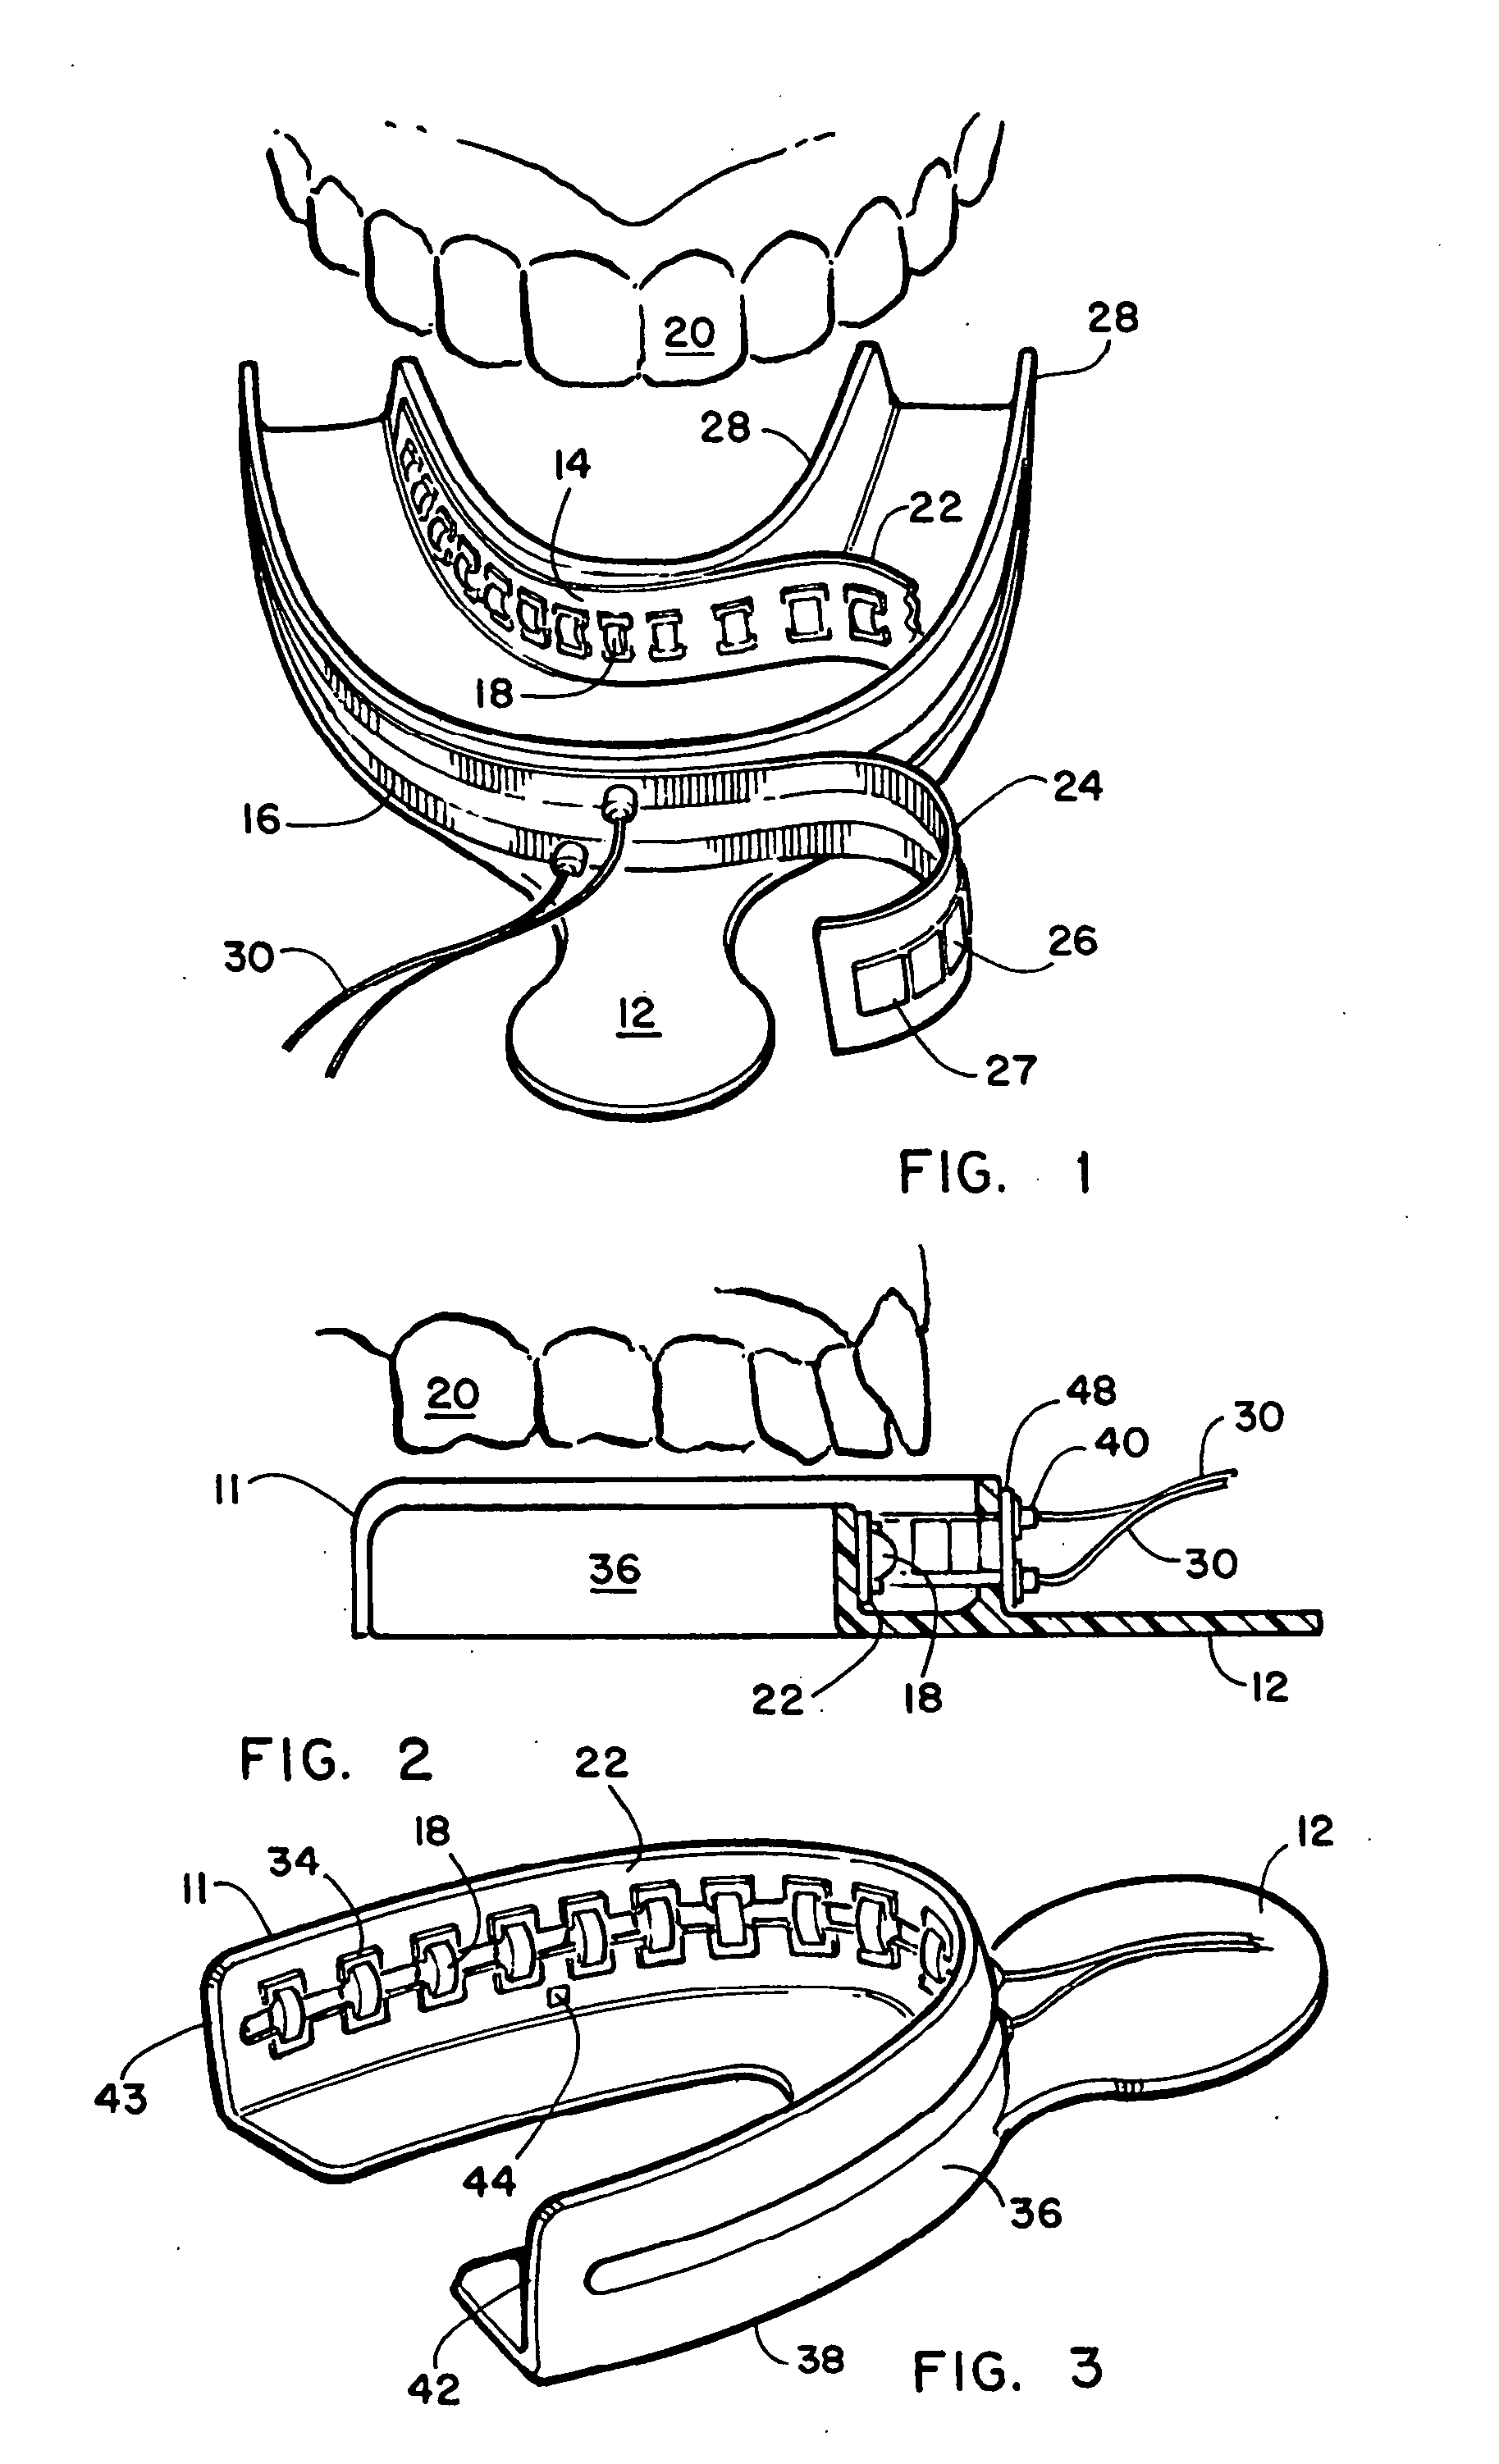 Dental imaging and treatment system